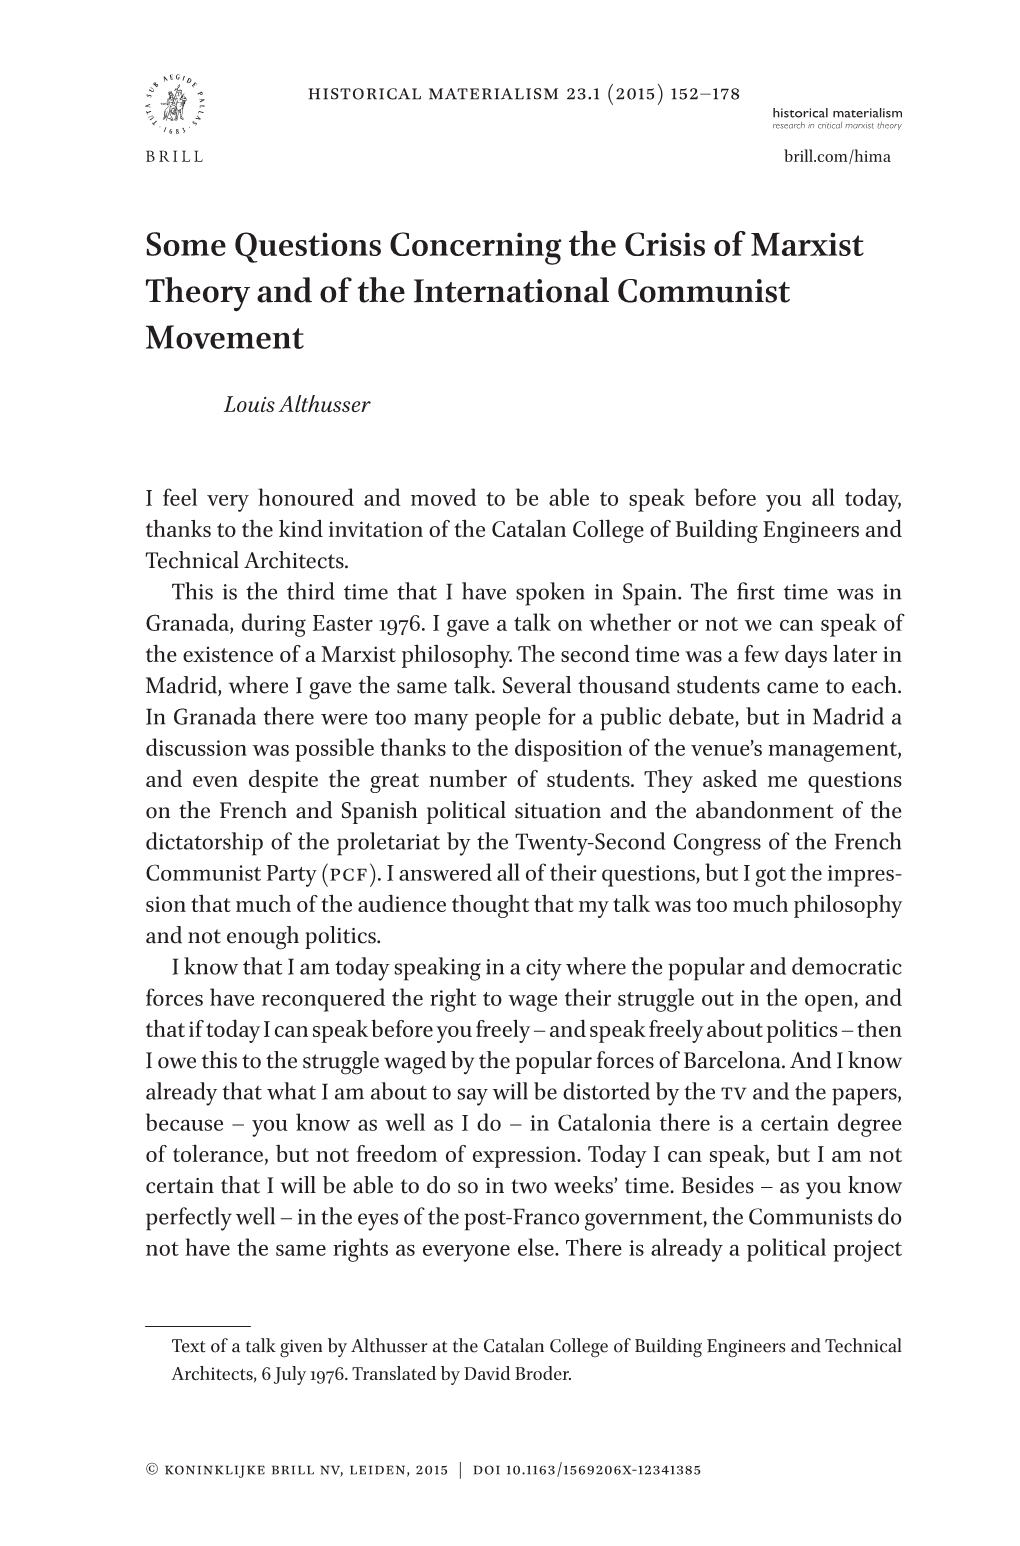 Some Questions Concerning the Crisis of Marxist Theory and of the International Communist Movement